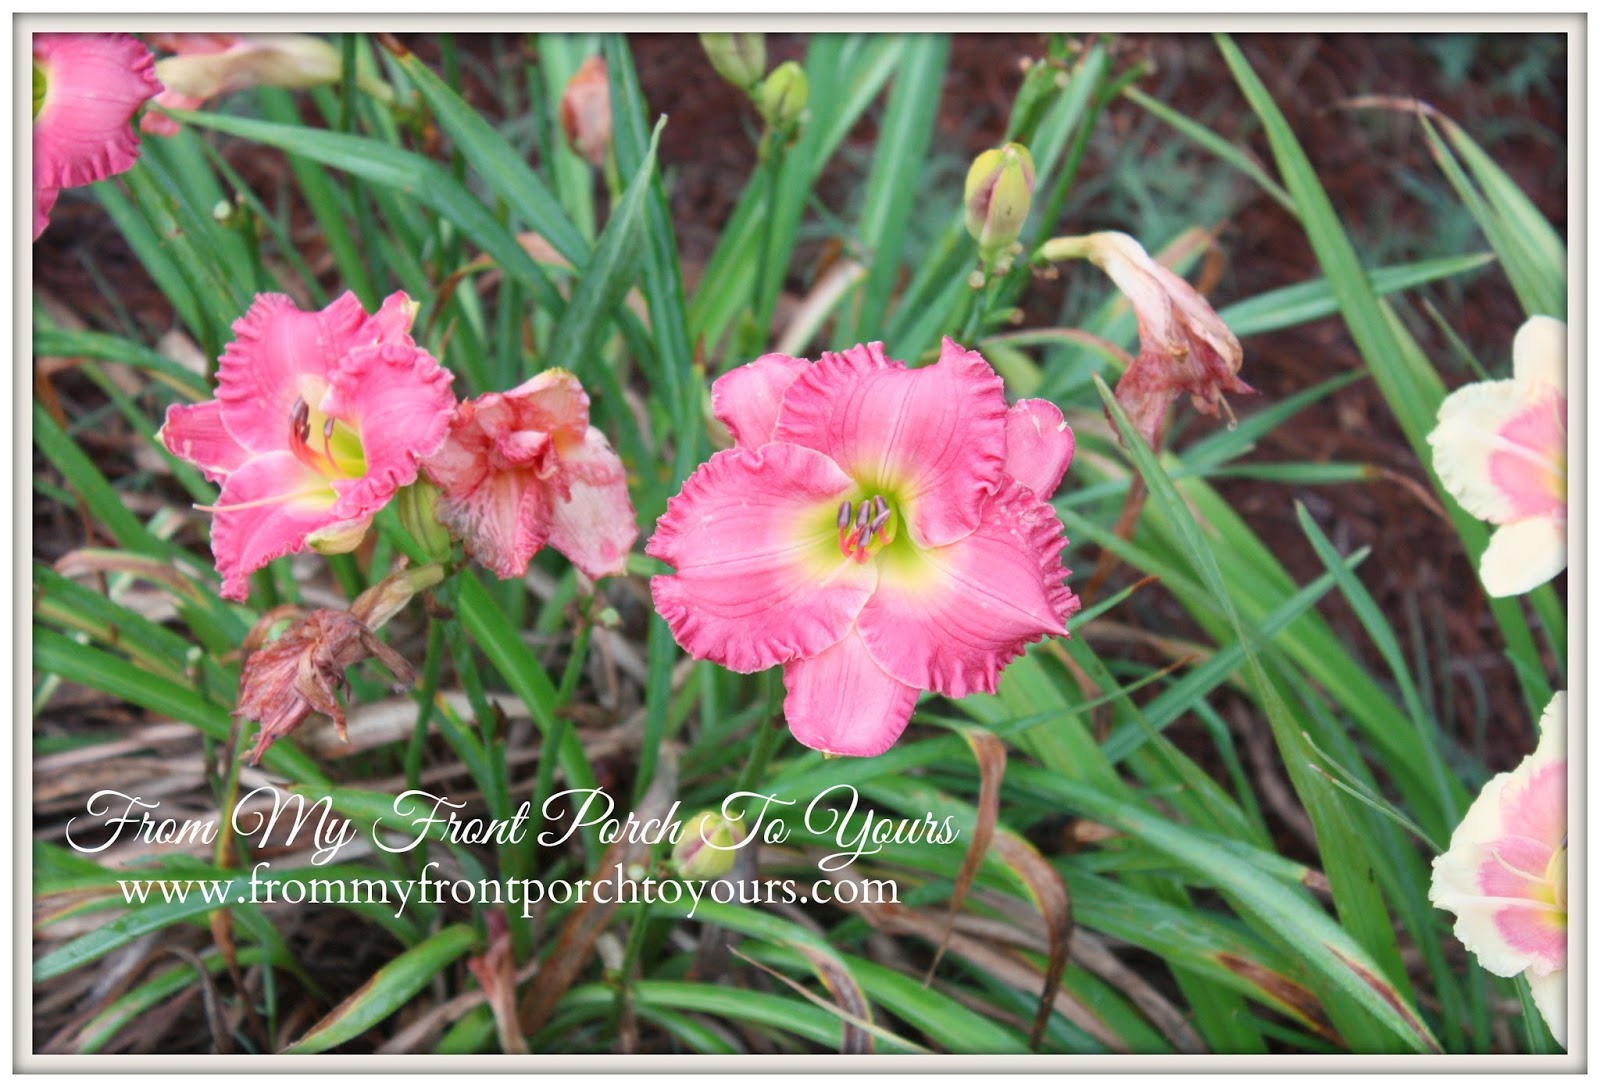 From My Front Porch To Yours- Flower Garden Lillies